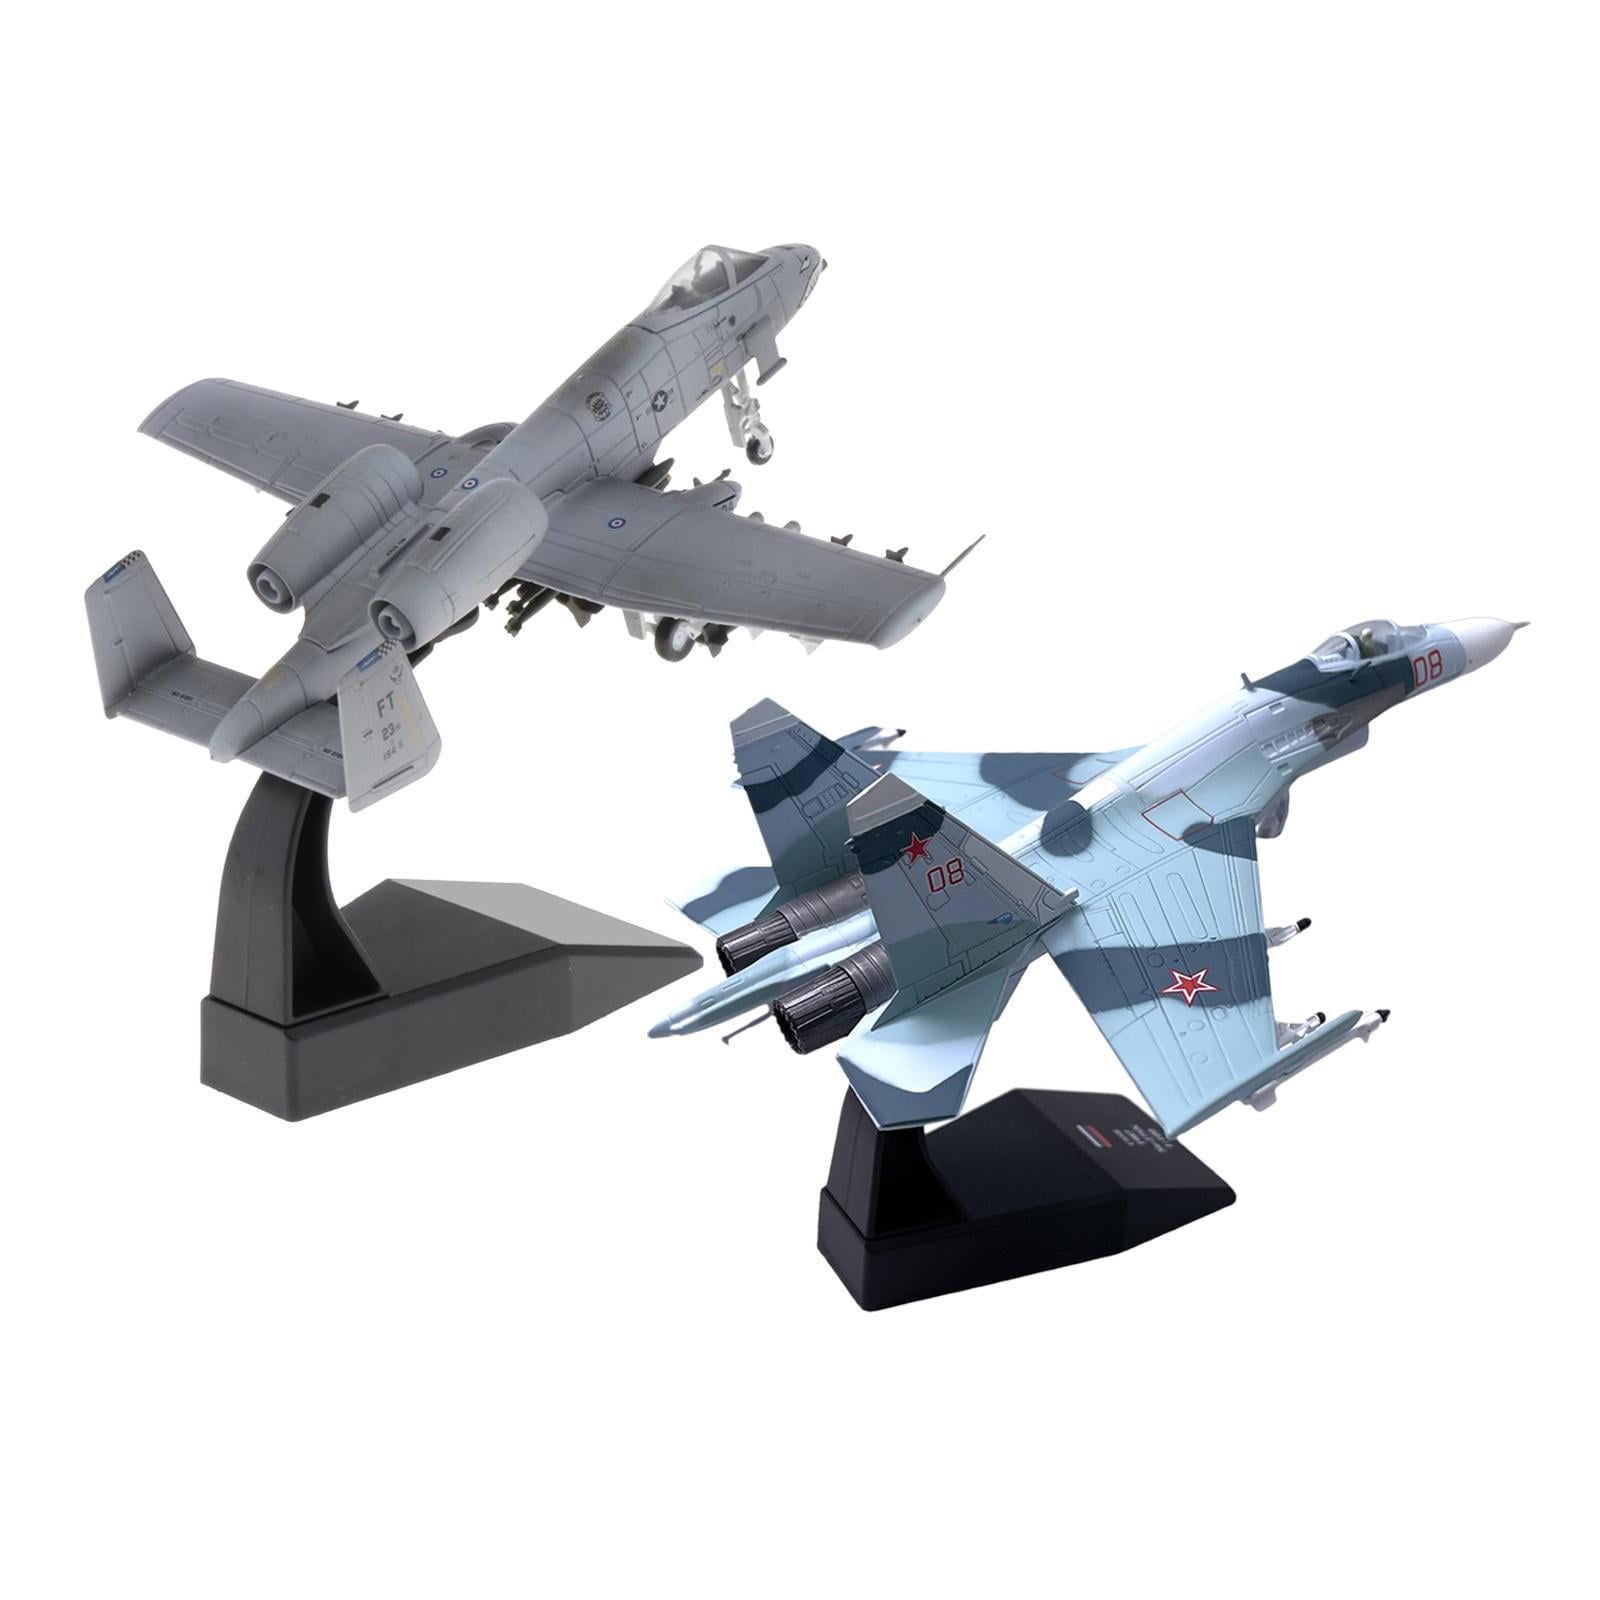 1:100 Flanker Sukhoi Su-27 Alloy Diecast Model w/ Stand Office Kids Toys 